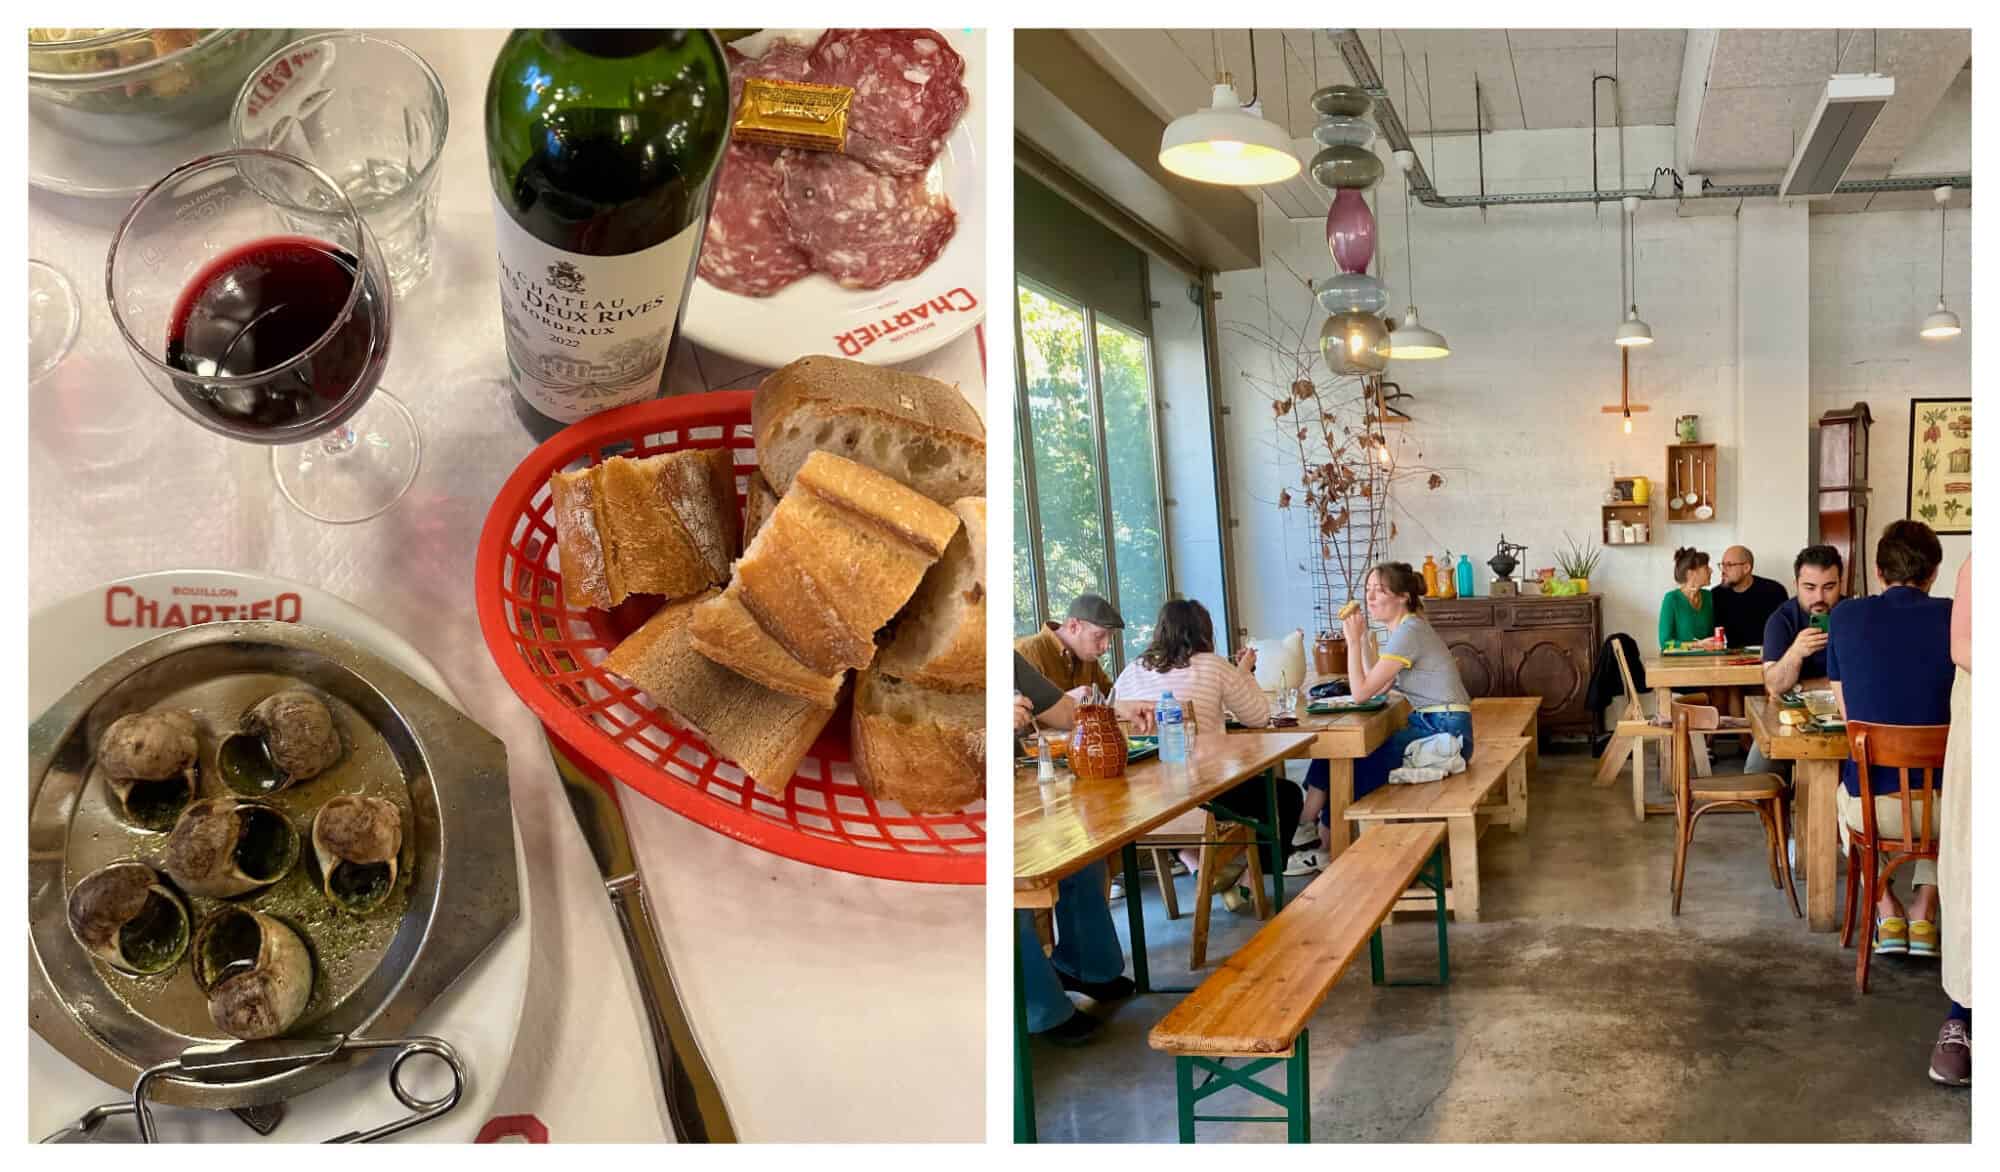 Left: An escargot dish with bread entrance meal at Bouillon Chartier in Paris; Right: Right: Clients seated inside a restaurant called Chez Foucher Mère et Fille in Paris.